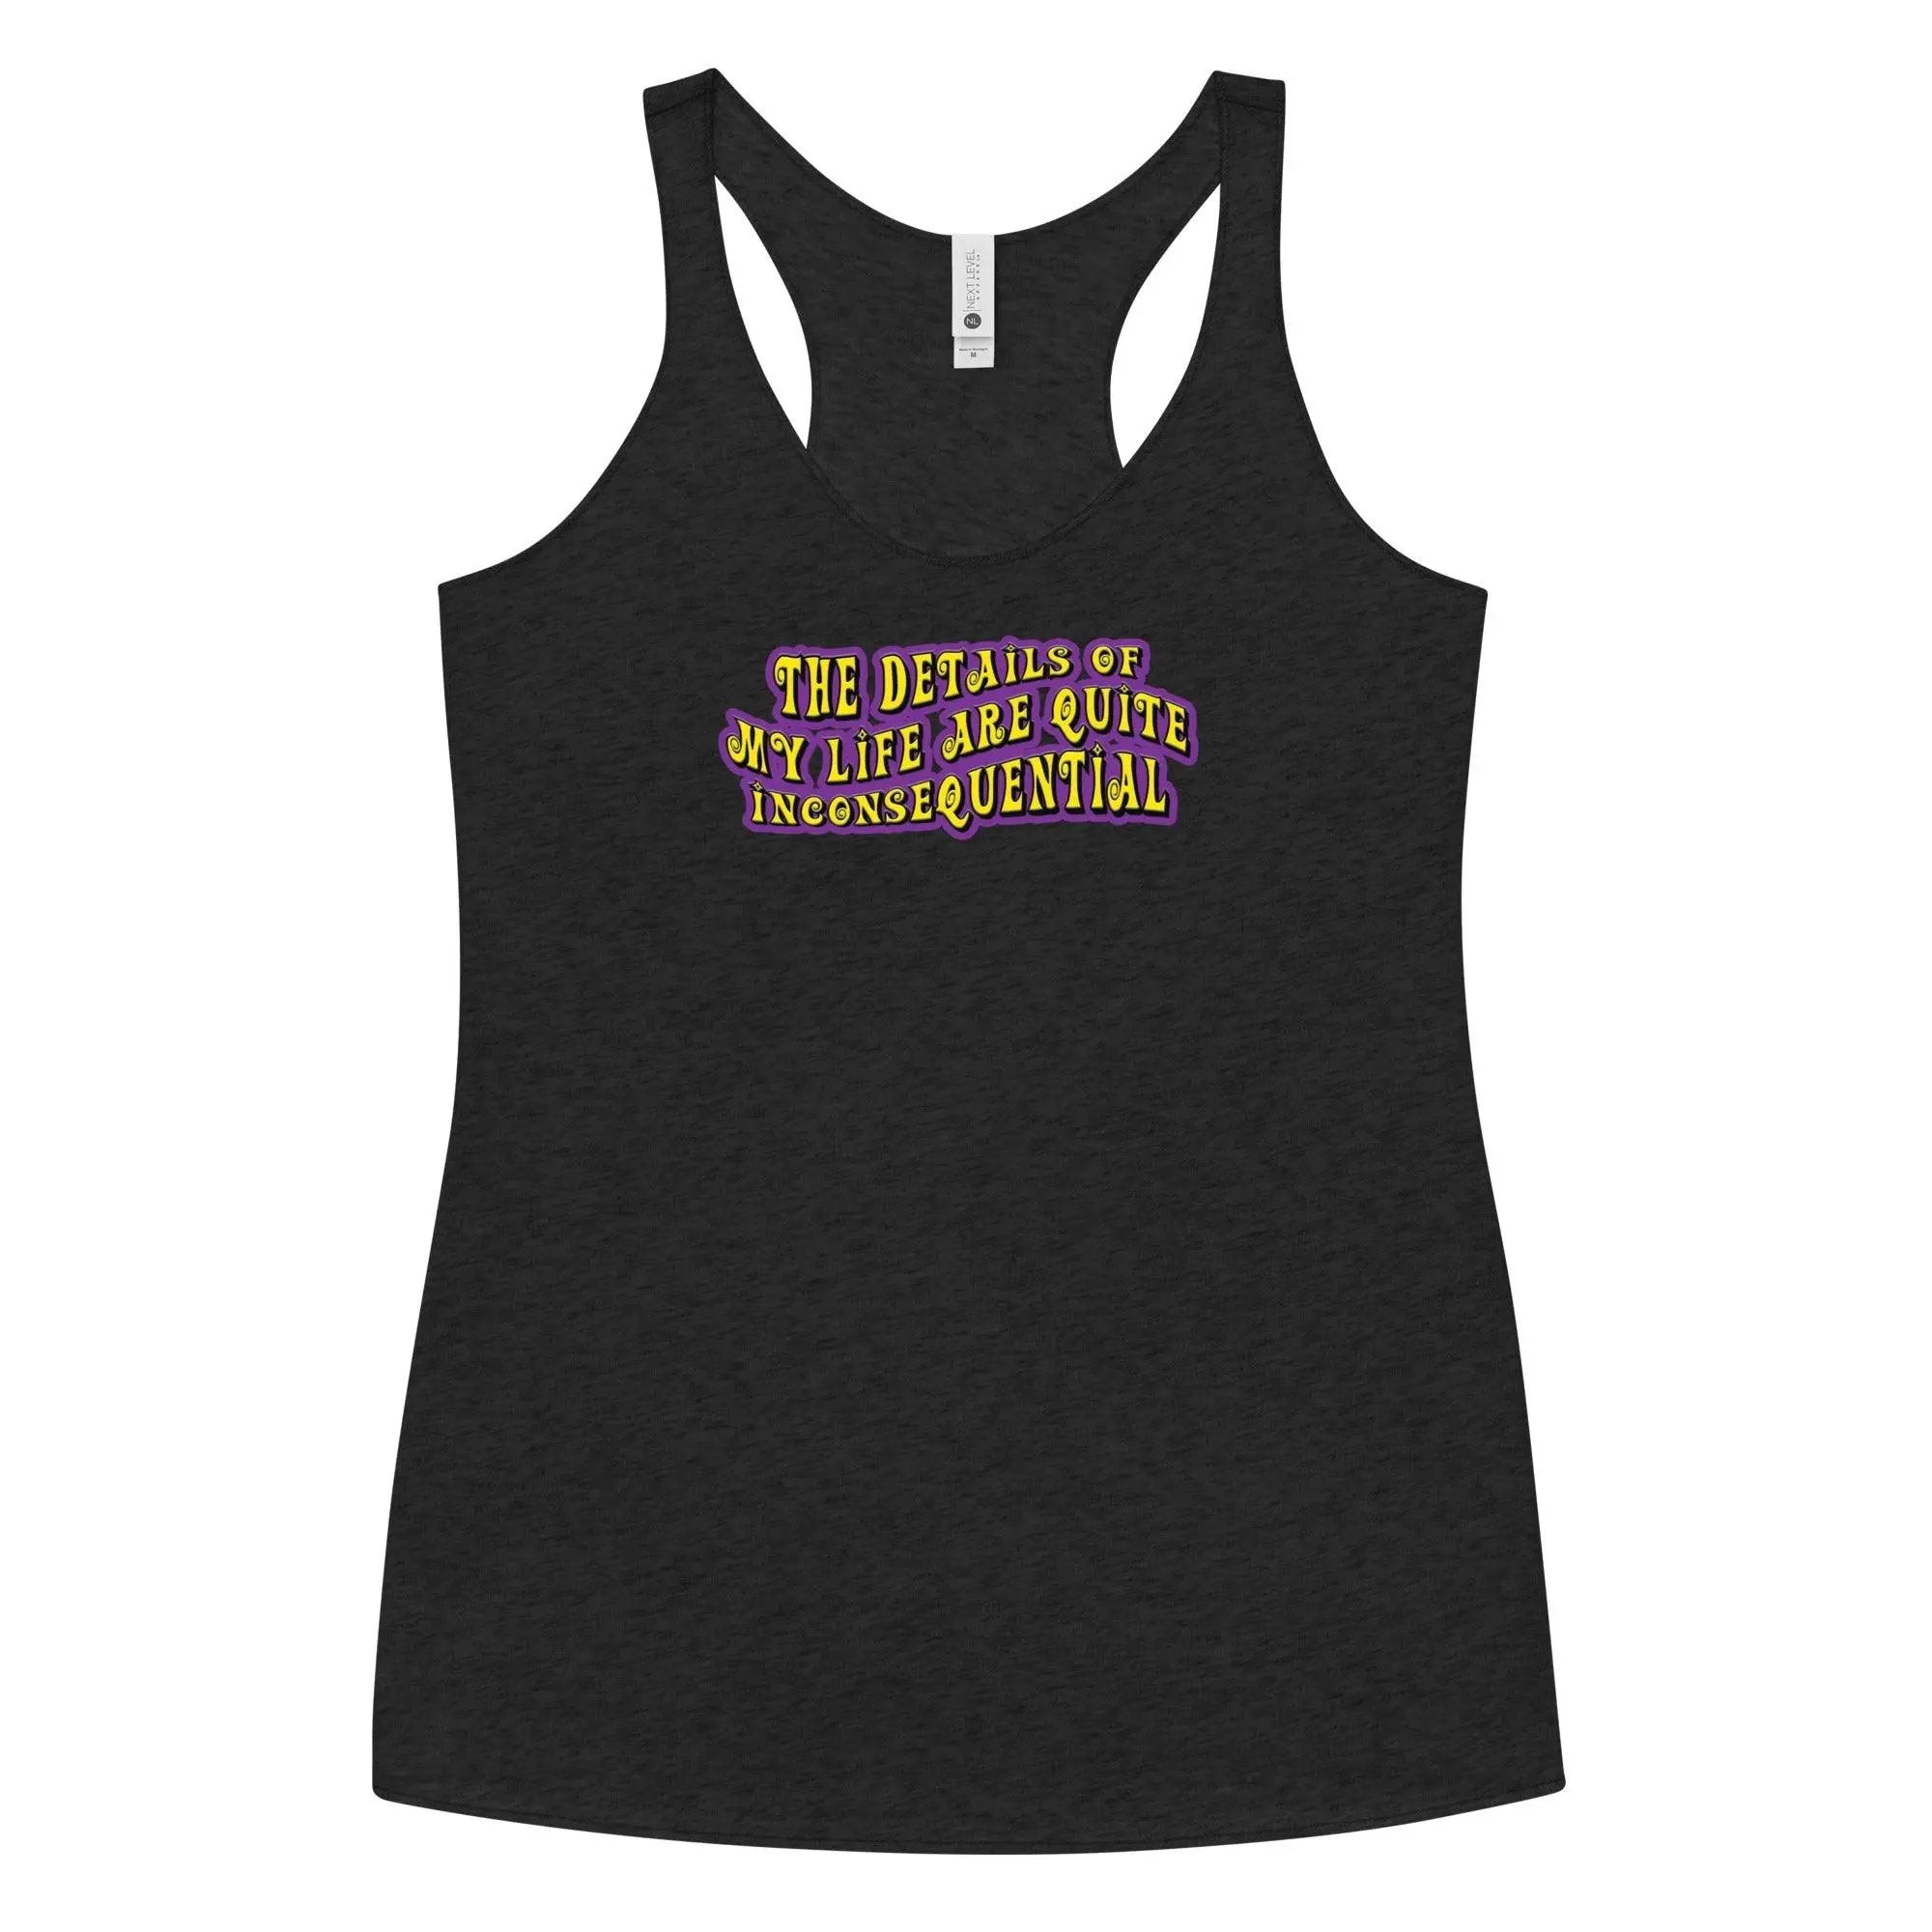 The Details of My Life...Women's Racerback Tank